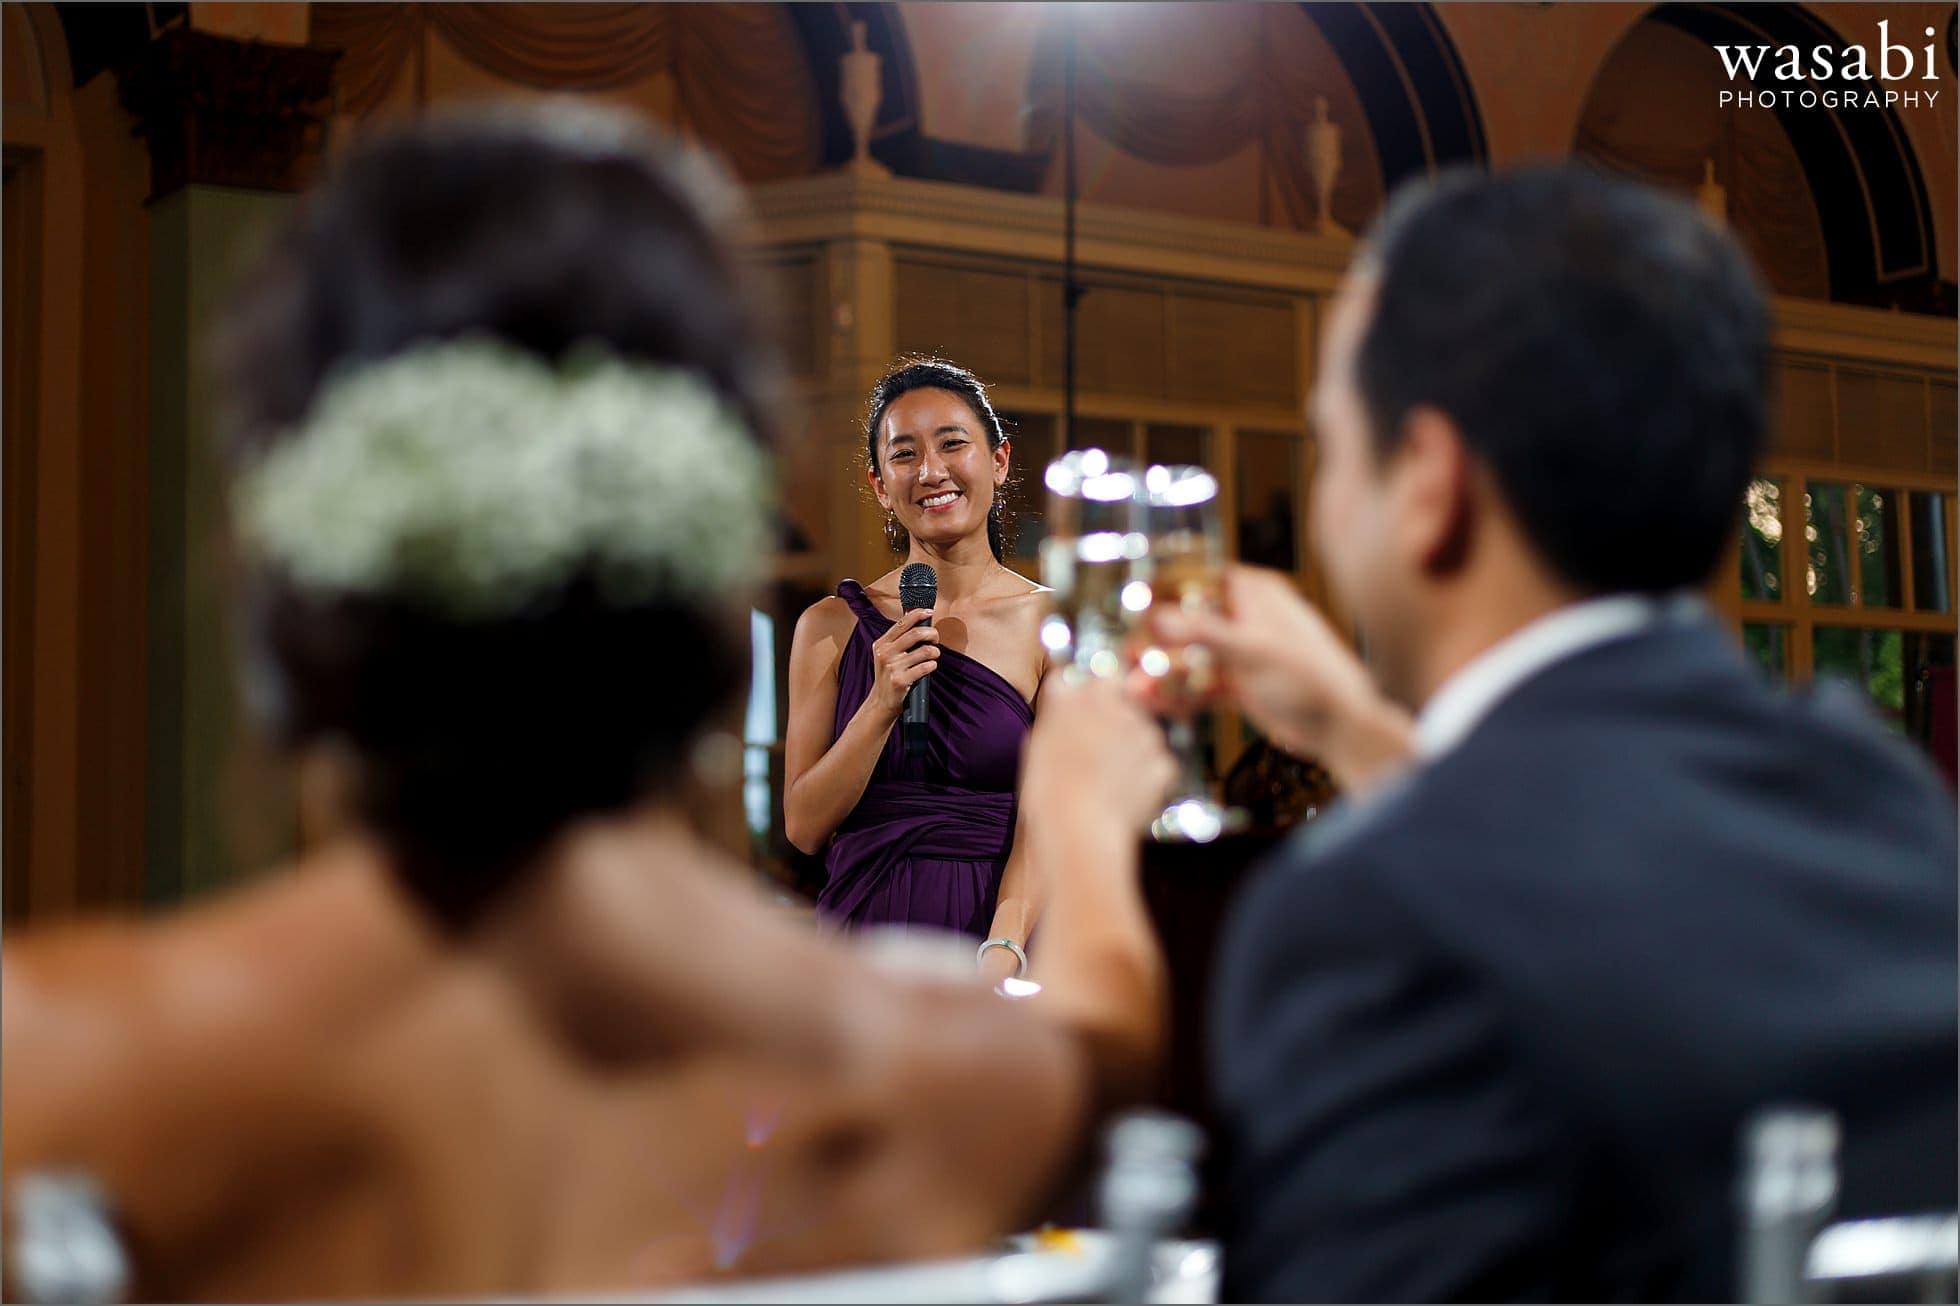 maid of honor toast at South Shore Cultural Center wedding reception photos